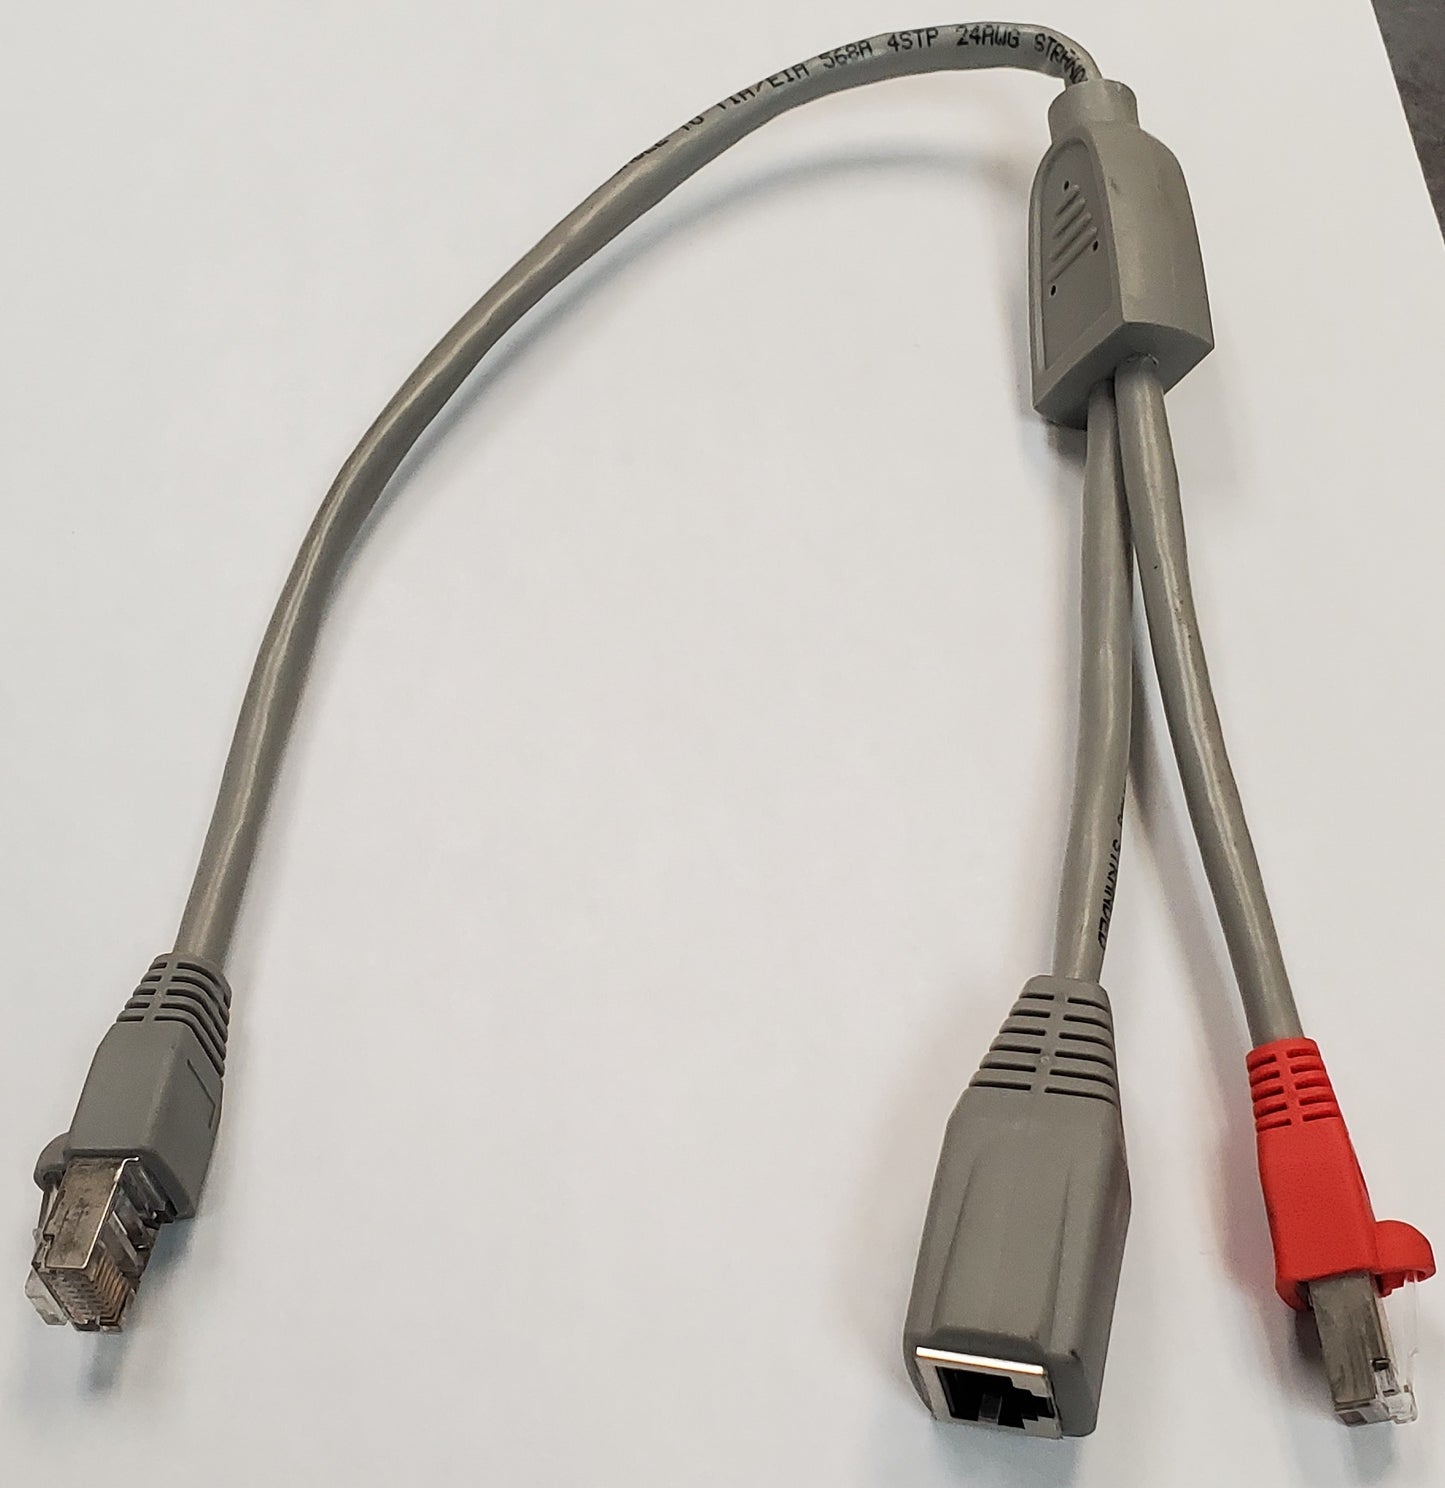 Serial Port Split Cable for ConnectPRO KVM switches